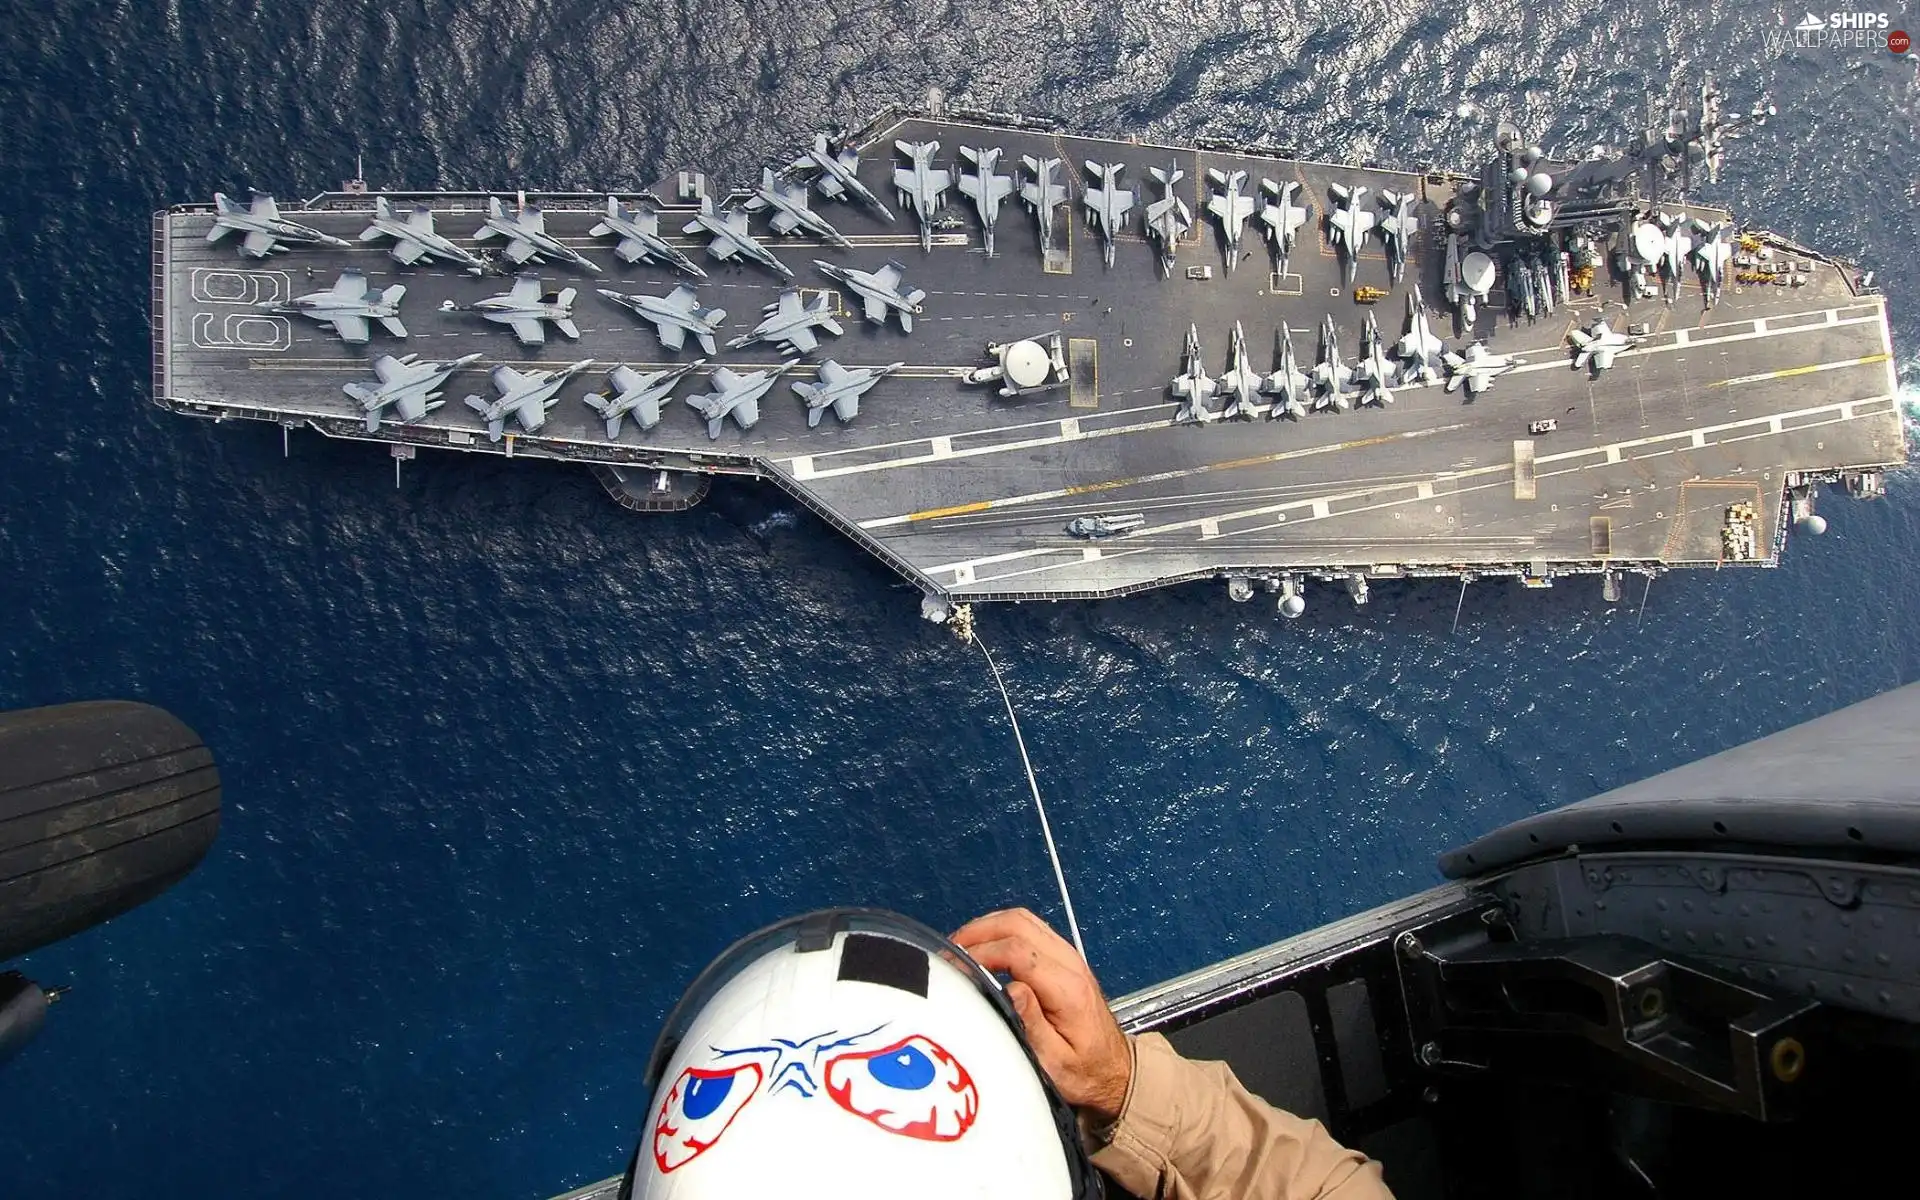 soldier, aircraft carrier, Planes